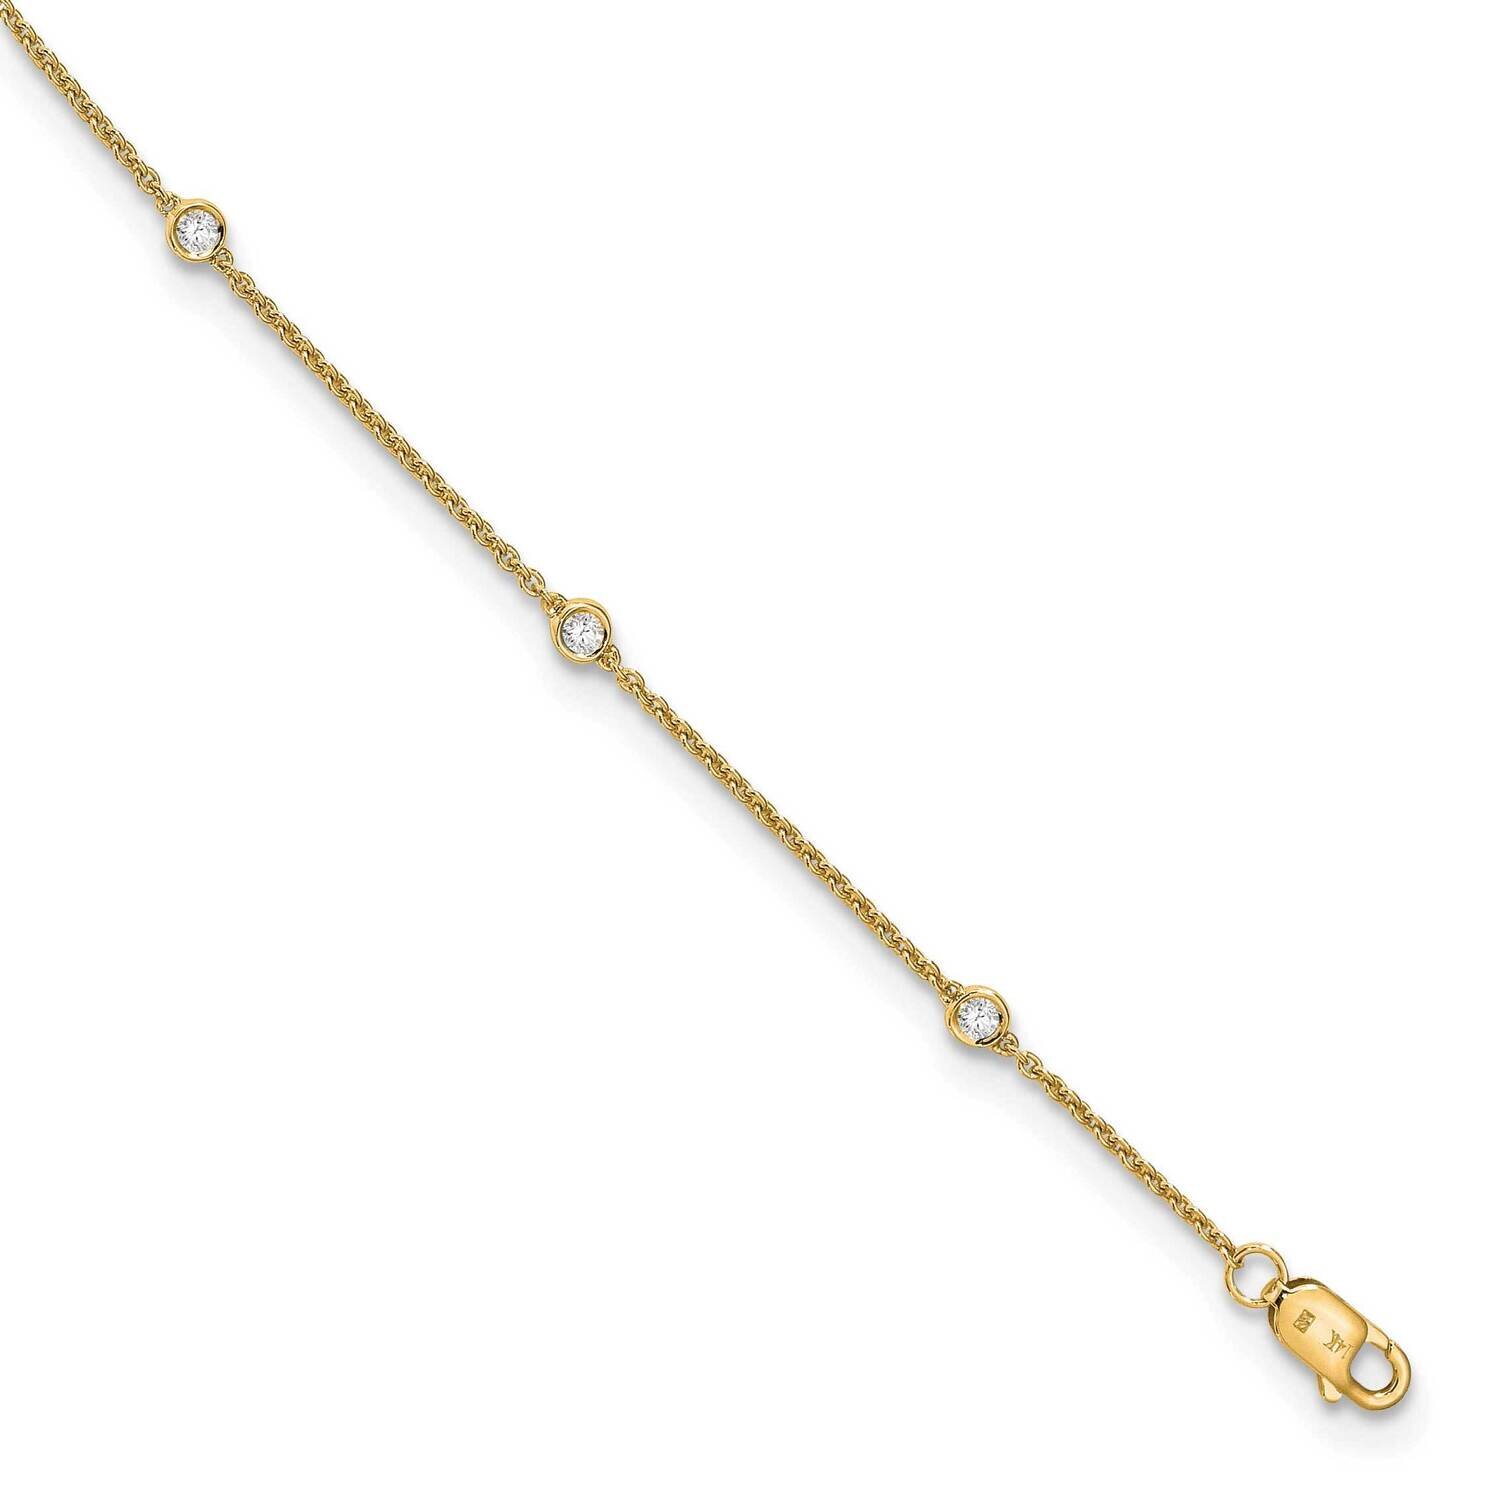 Vs/Si, D E F, Cable Station Anklet 14k Gold Lab Grown Diamond PM1007-021-YLD-9